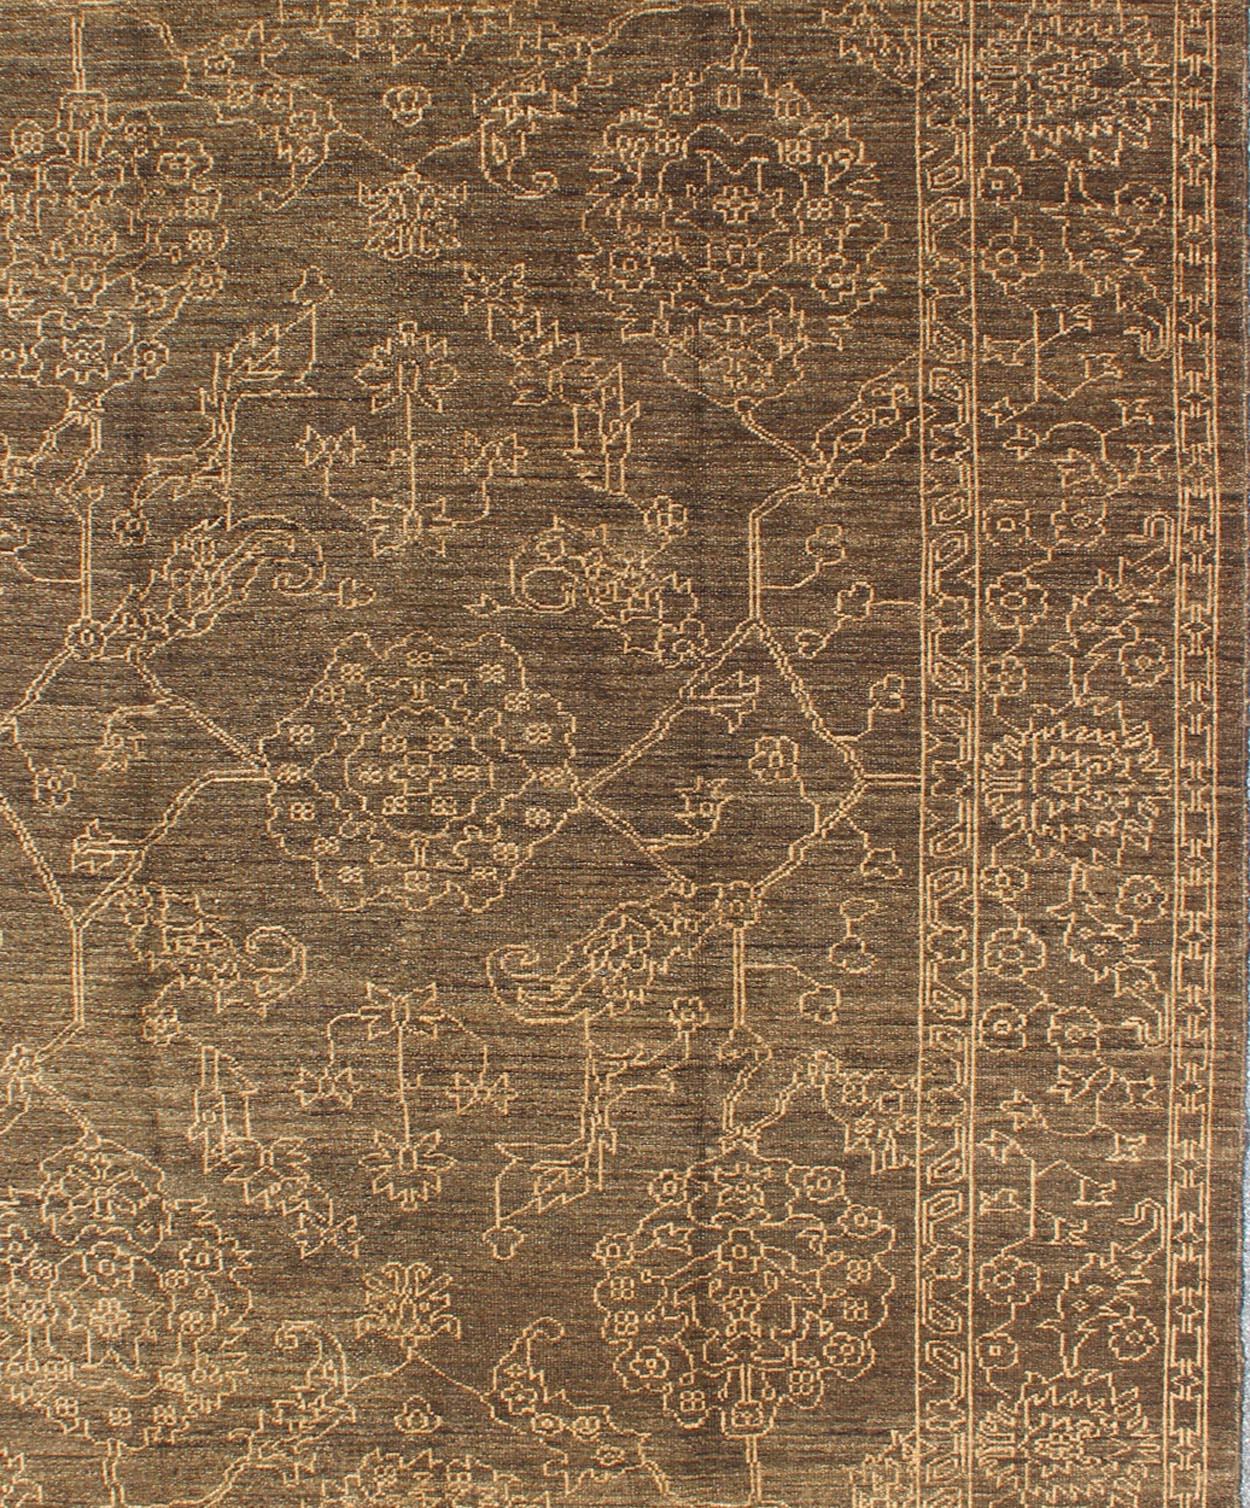 Light brown and very finely woven Transitional rug in the brown background of light blue highlights, Keivan Woven Arts, rug AN-115307, country of origin / type: Turkey / Tribal

This Turkish rug features a transitional design of stylized motifs in